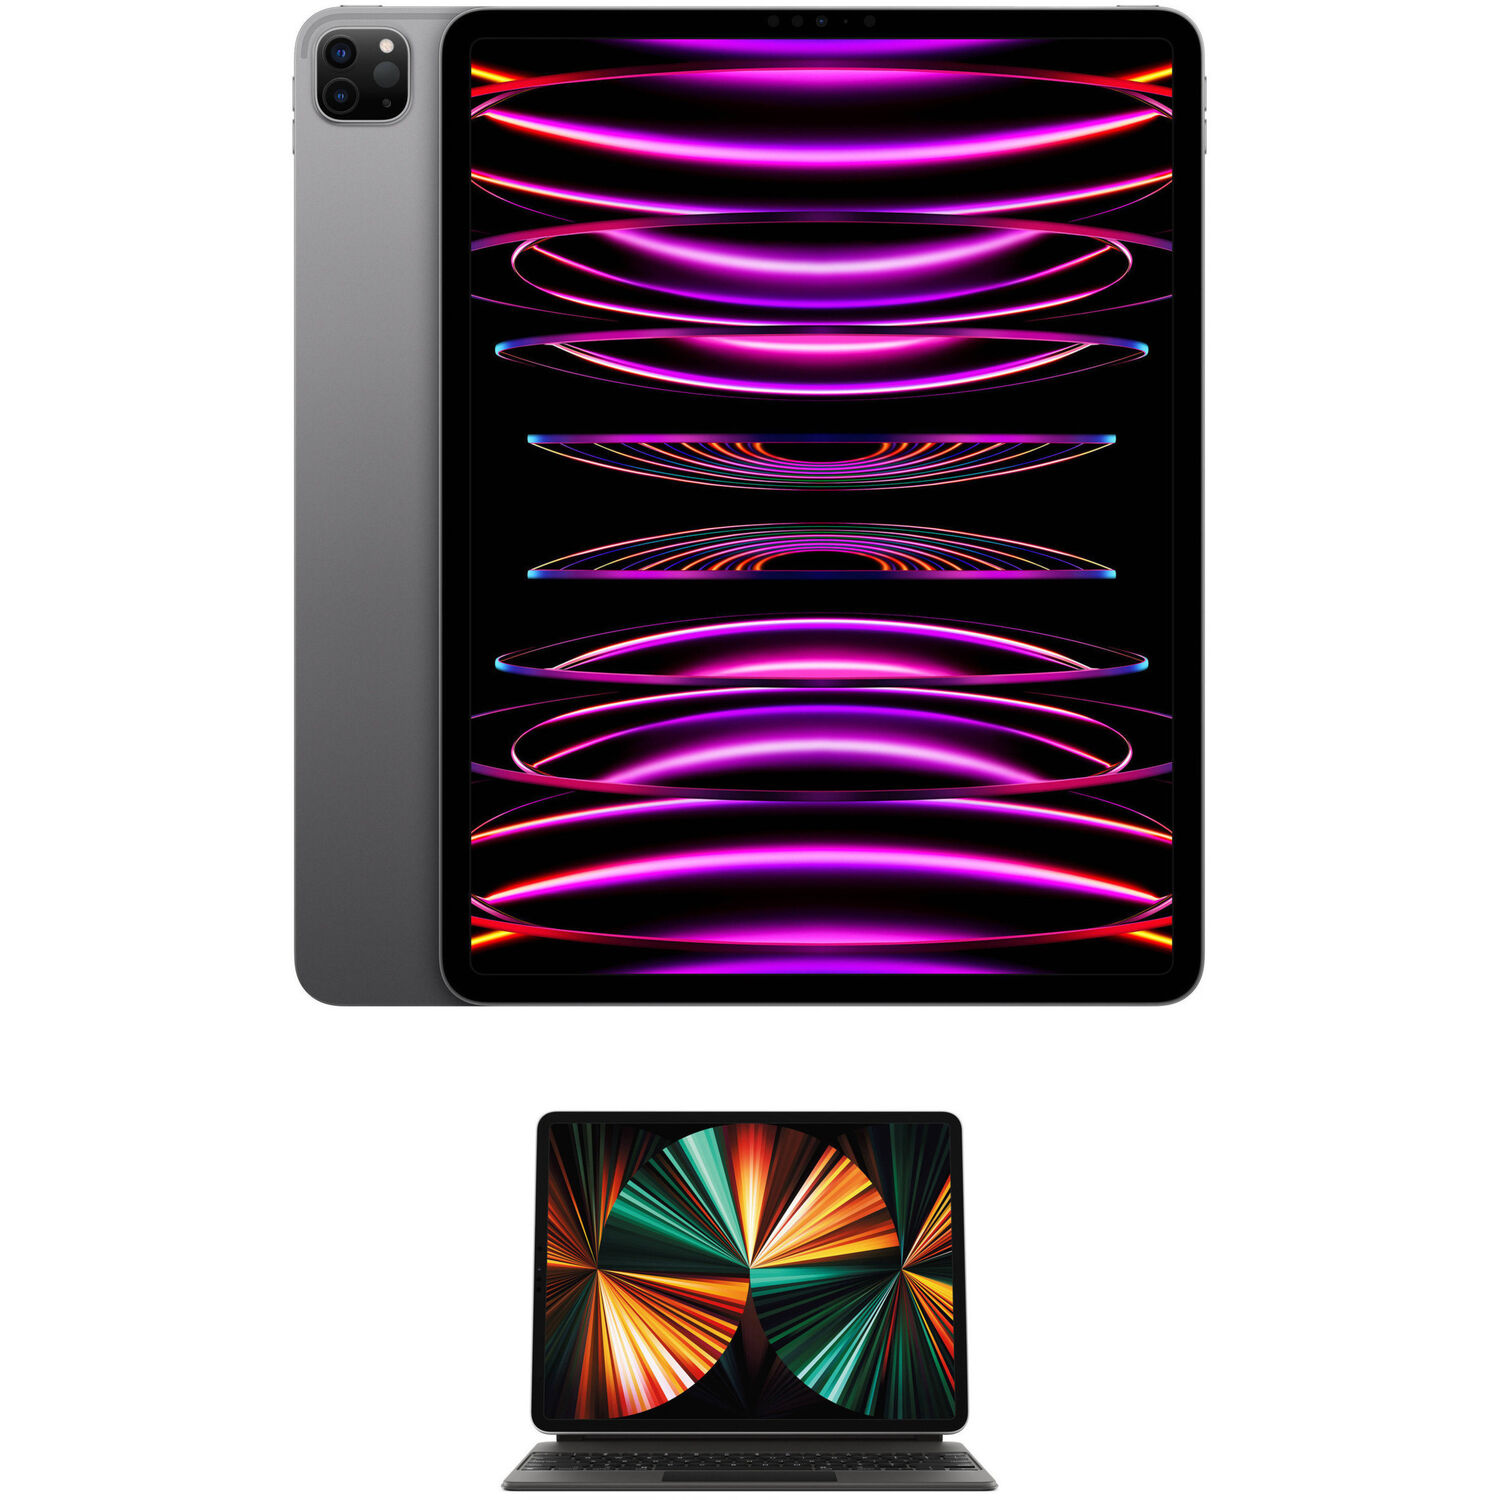 Tablet Apple Ipad Pro 12.9 M2 Chip Late 2022 128Gb Wi Fi Only Space Gray con Teclado Magic Par